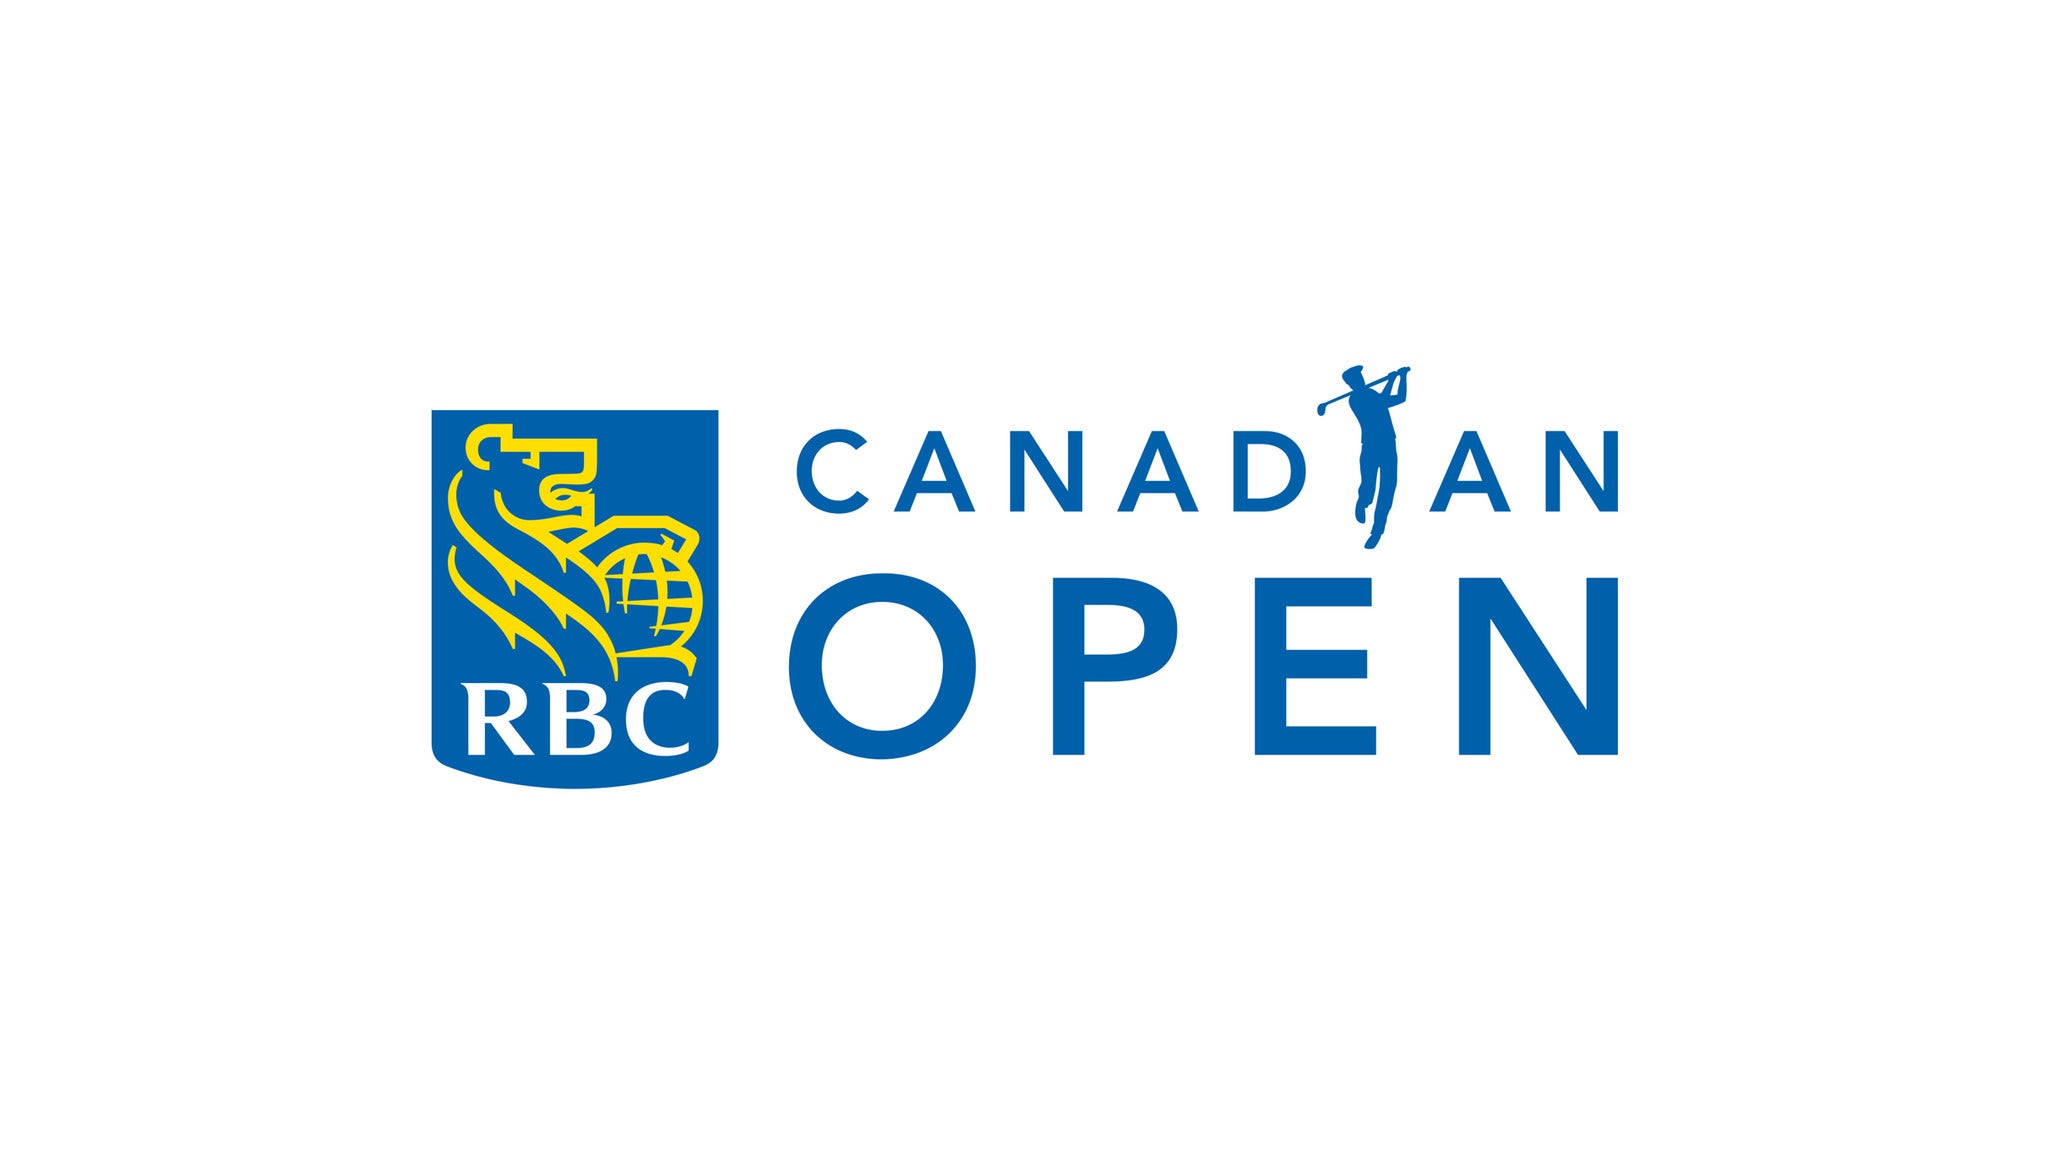 RBC Canadian Open Friday /RBCxMusic Concert ft.Black Eyed Peas in North York promo photo for RBCCO Volunteer Chair Discount presale offer code